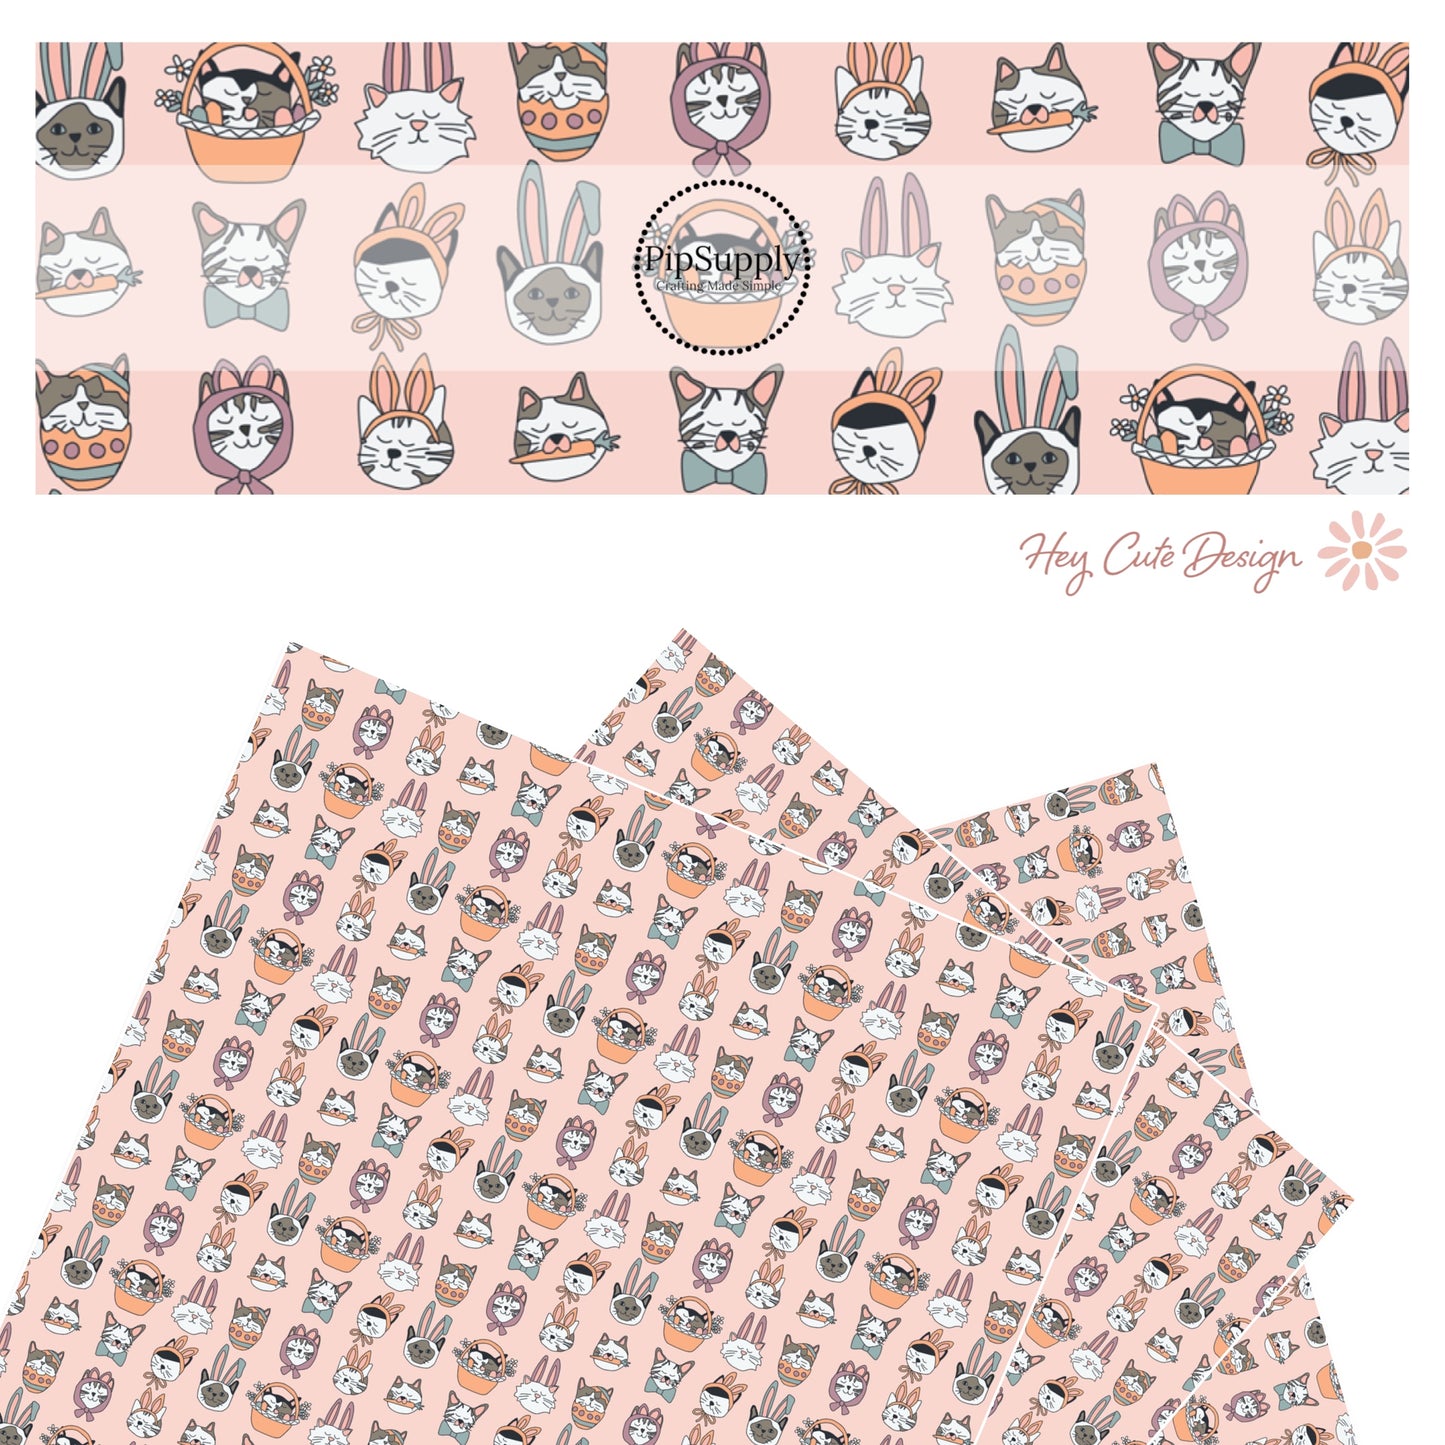 gray and white cats dressed as bunnies on light pink faux leather sheets